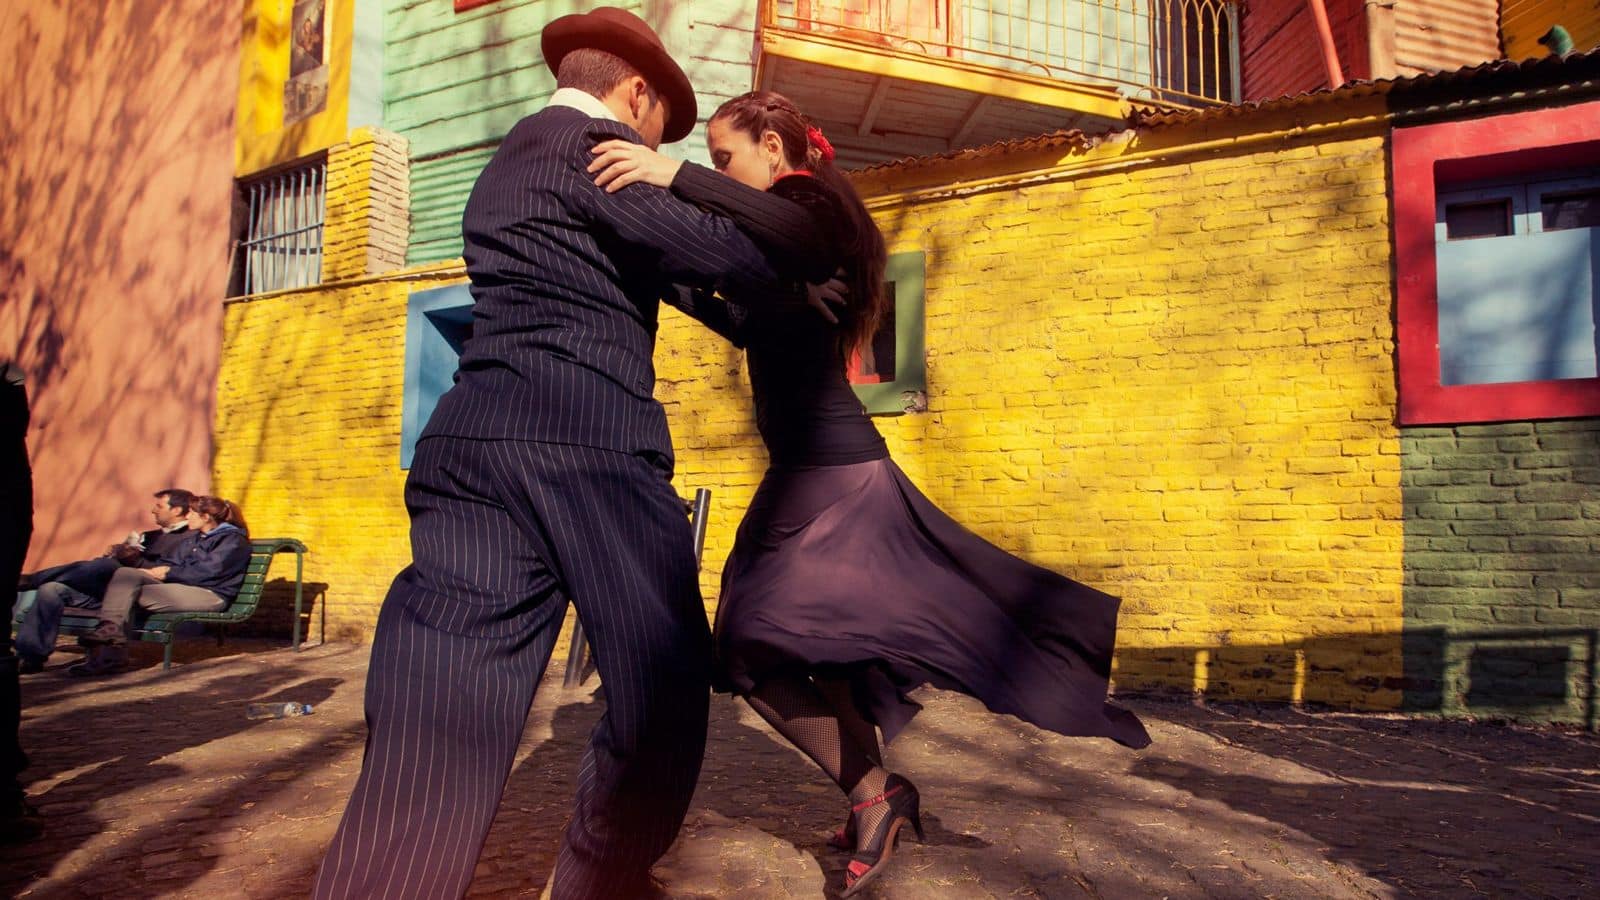 Embrace the tango spirit of Buenos Aires with these recommendations